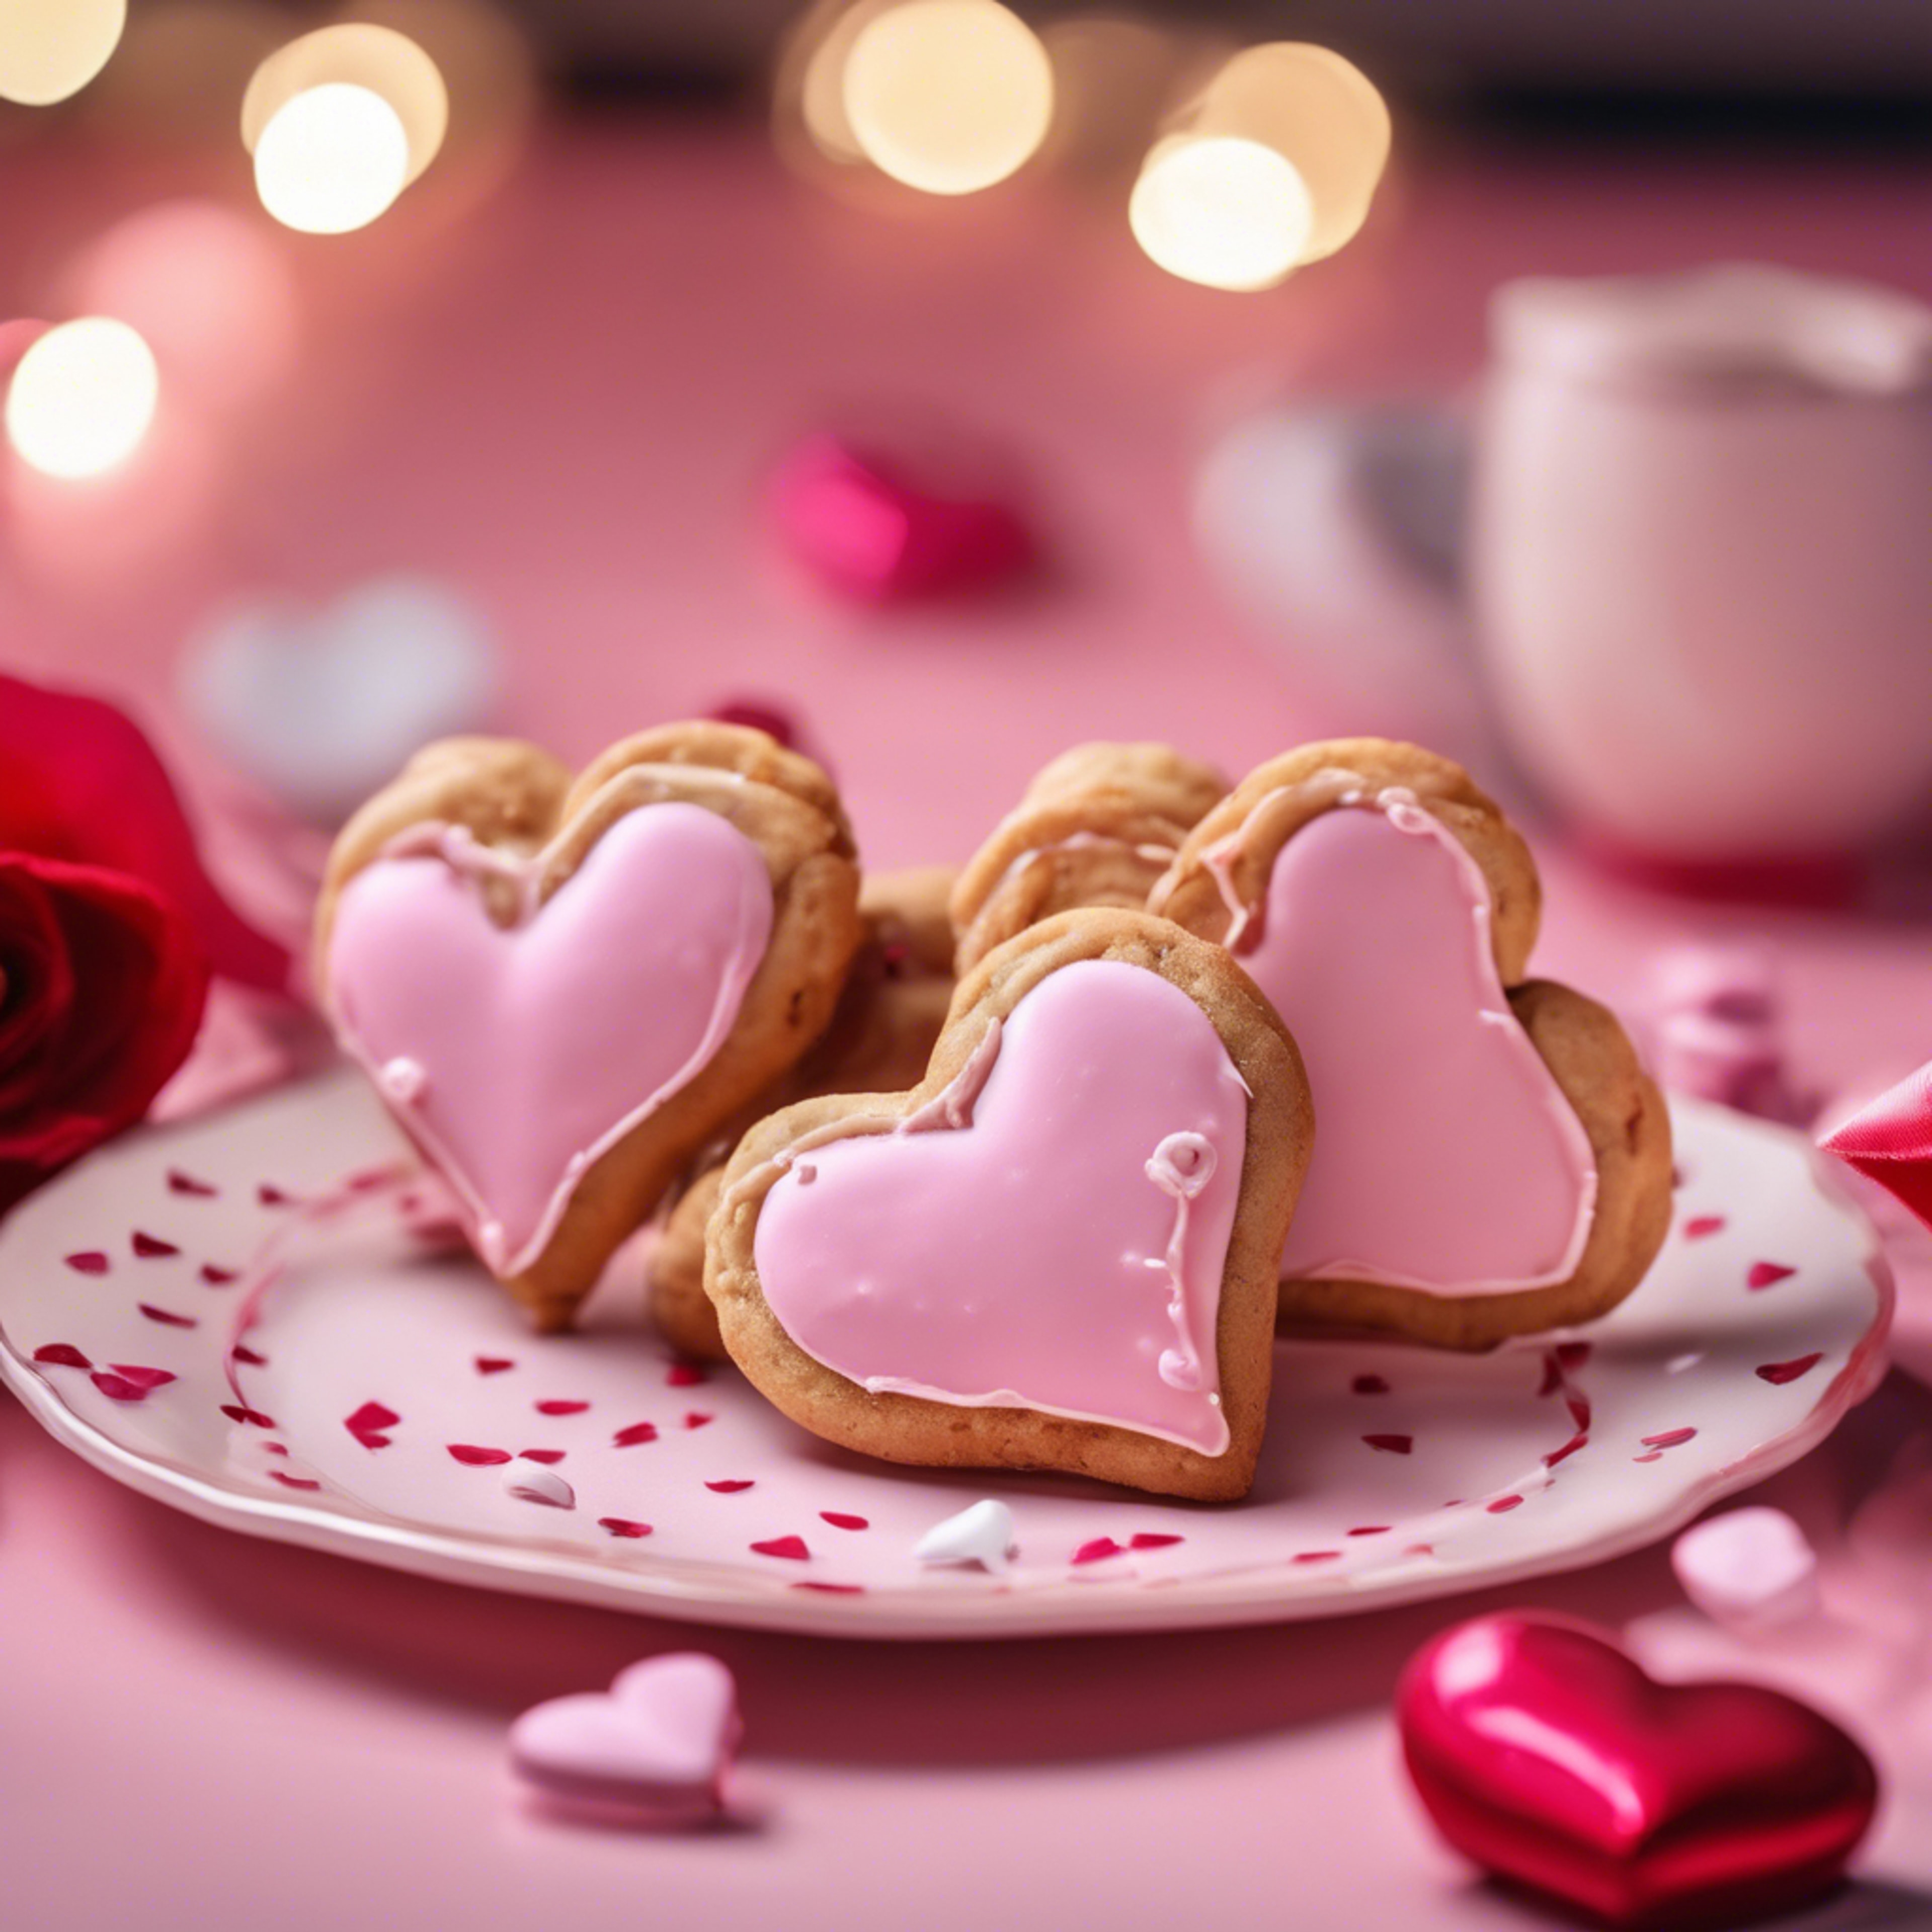 A pair of heart-shaped frosted cookies on a vibrant Valentine's day setting. 벽지[699c1bd667c44183af85]